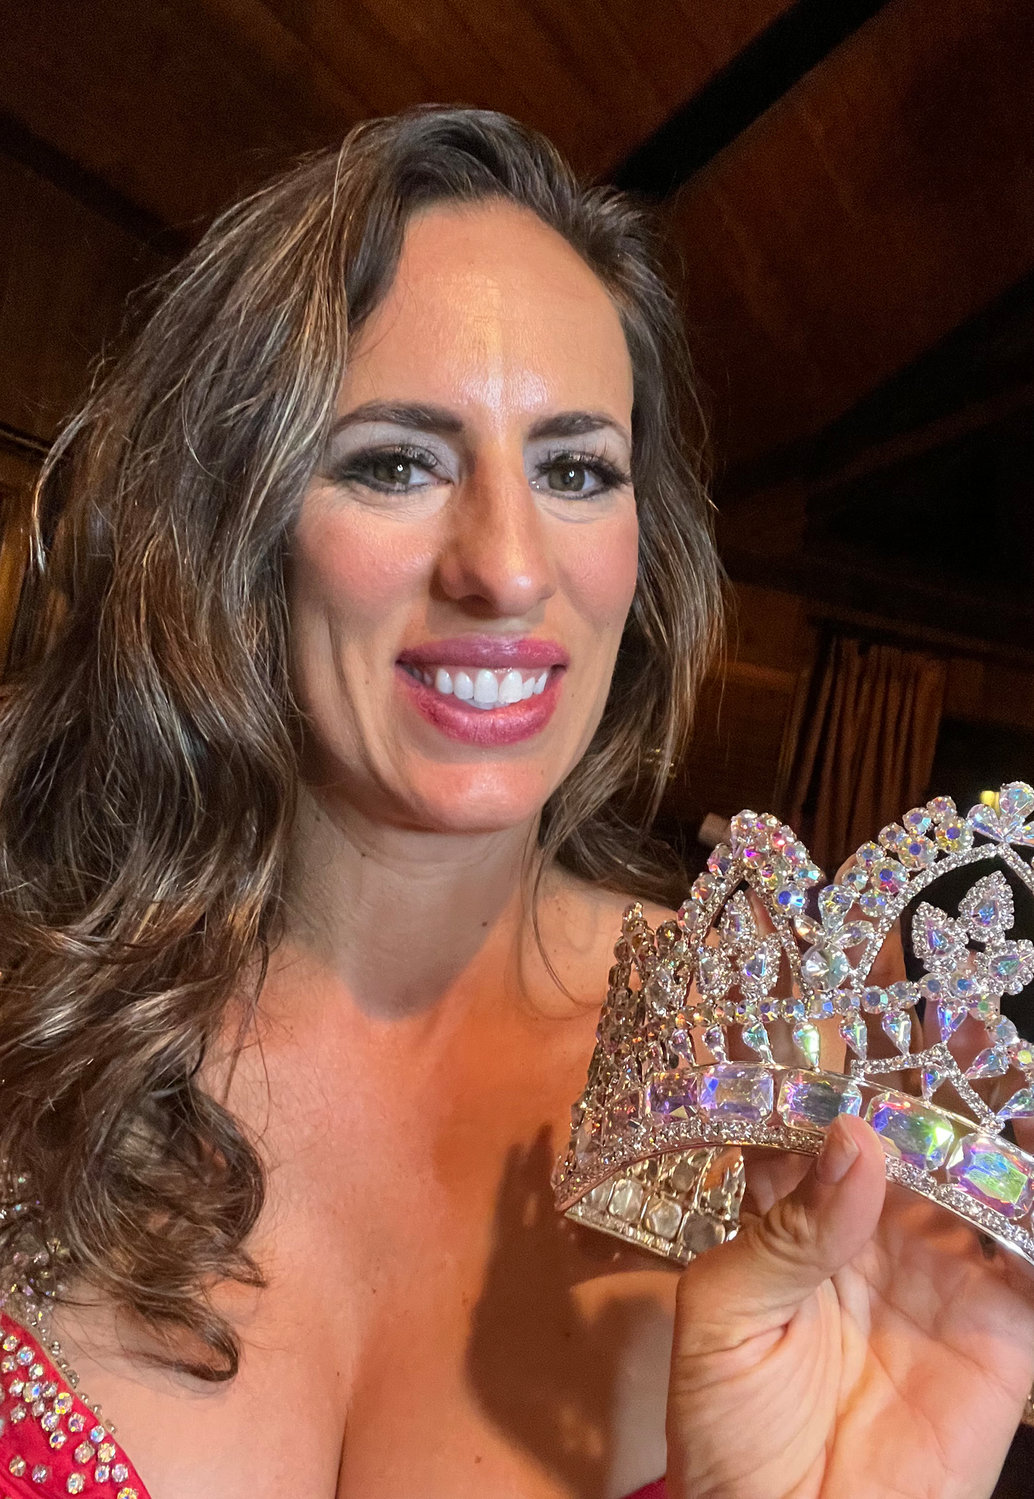 Dr. Kella Price of Aledo recently competed in the Dr. World North America Pageant where she received two awards and had the opportunity to further spread her message of healthy living.